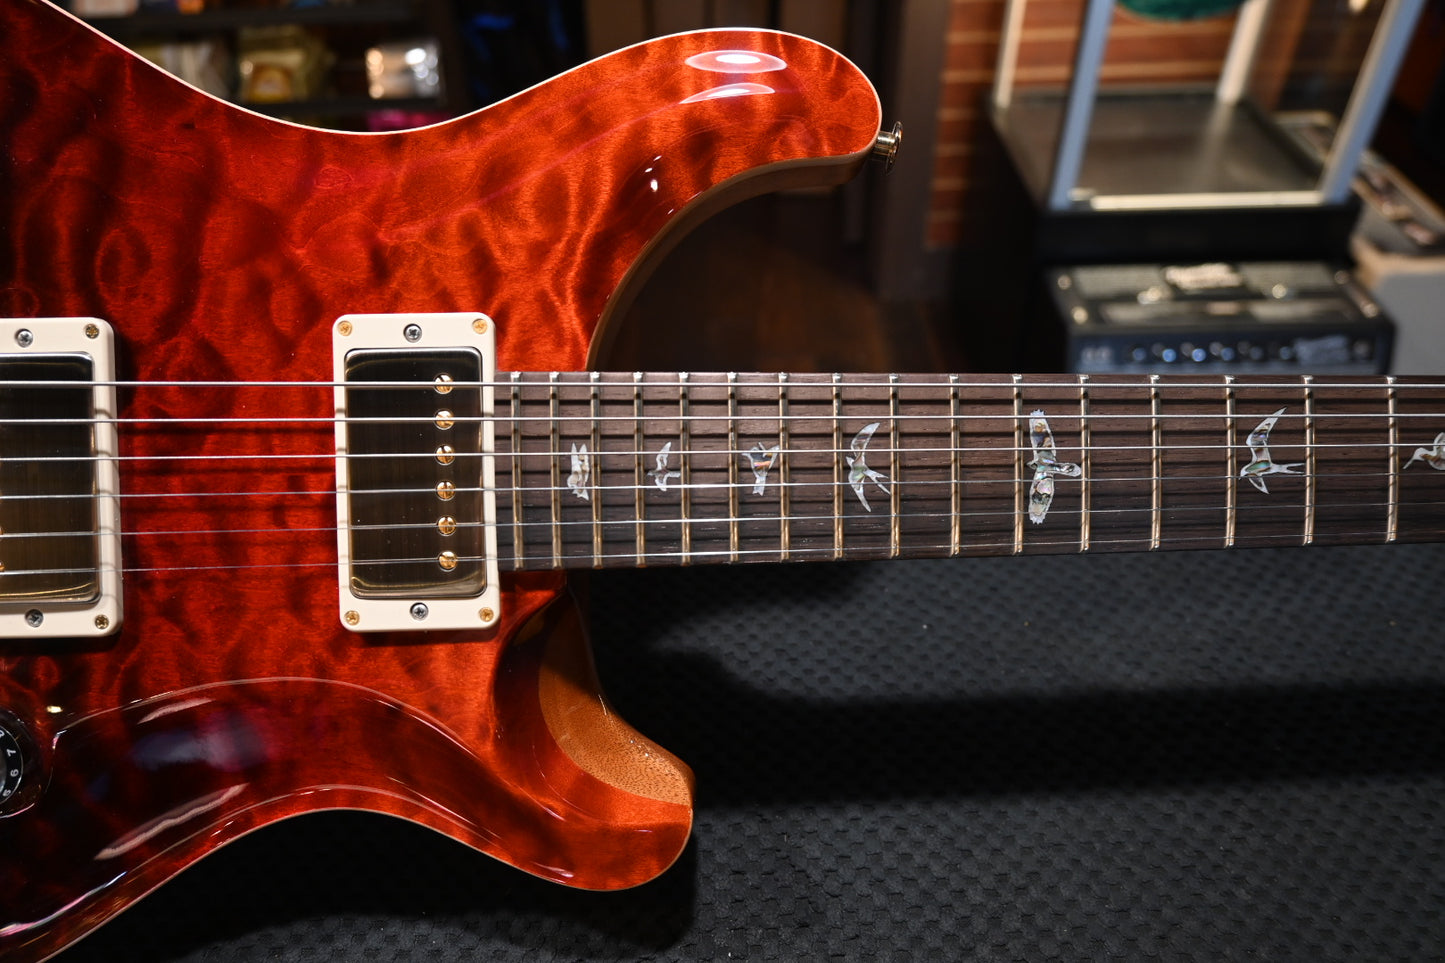 PRS Wood Library DGT 10-Top Quilt Brazilian Rosewood - Fire Red to Grey Black Fade Guitar #0079 - Danville Music